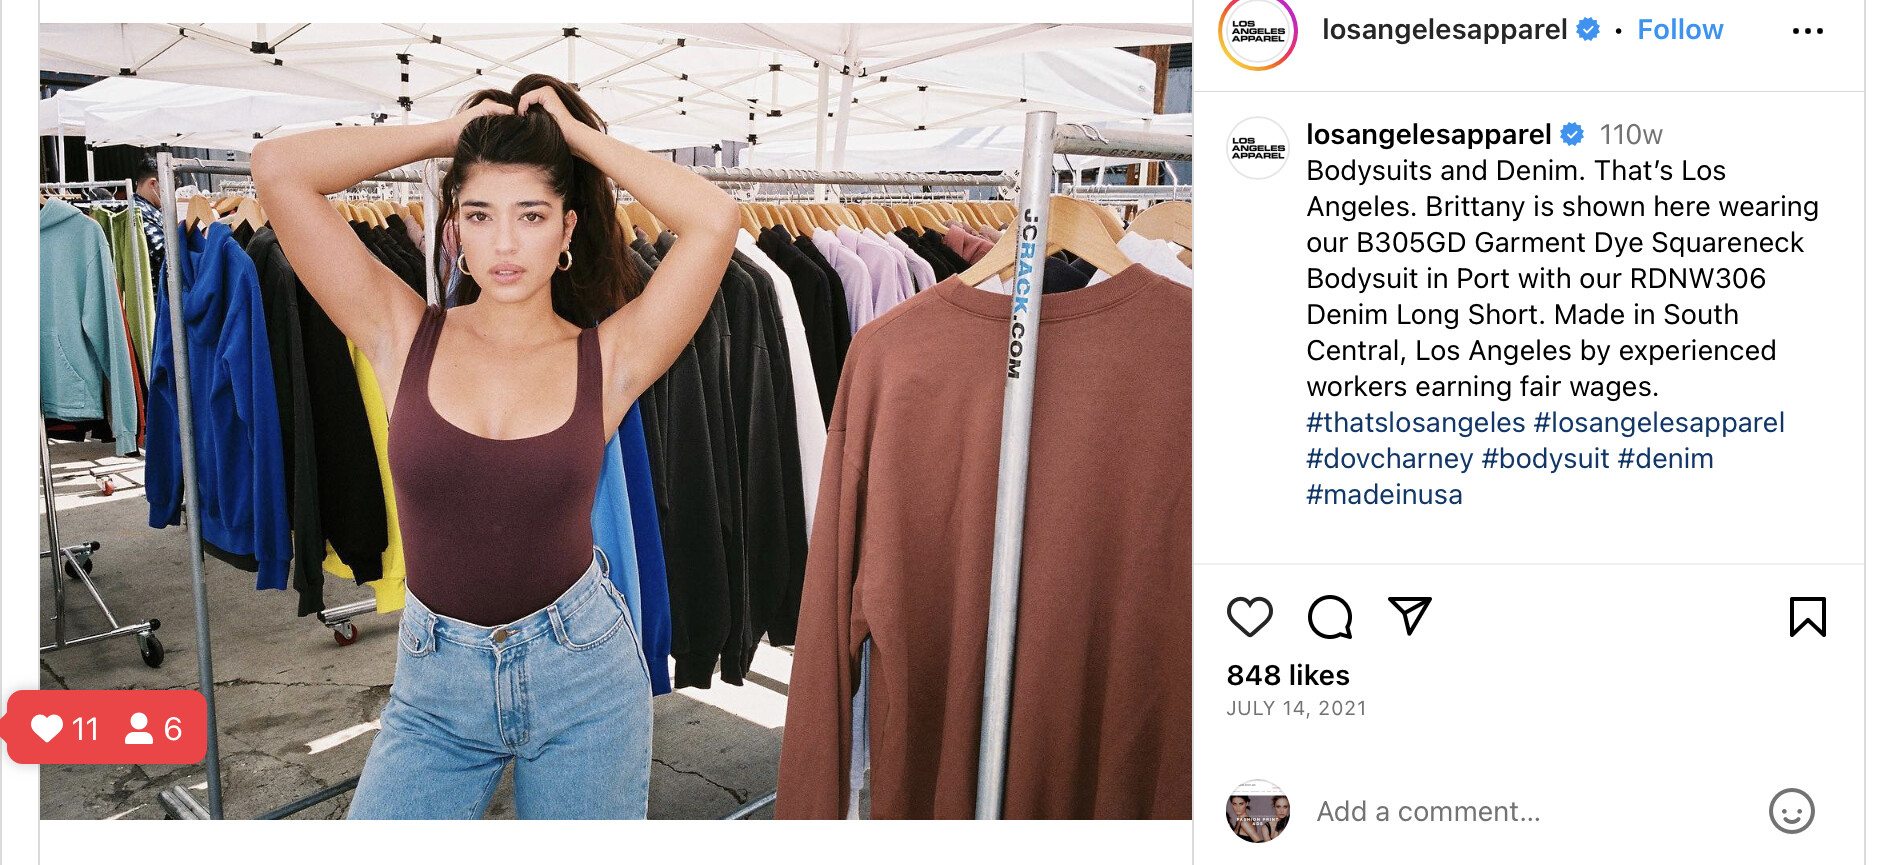 Any leads on this Los Angeles Apparel model? - MODEL ID [help